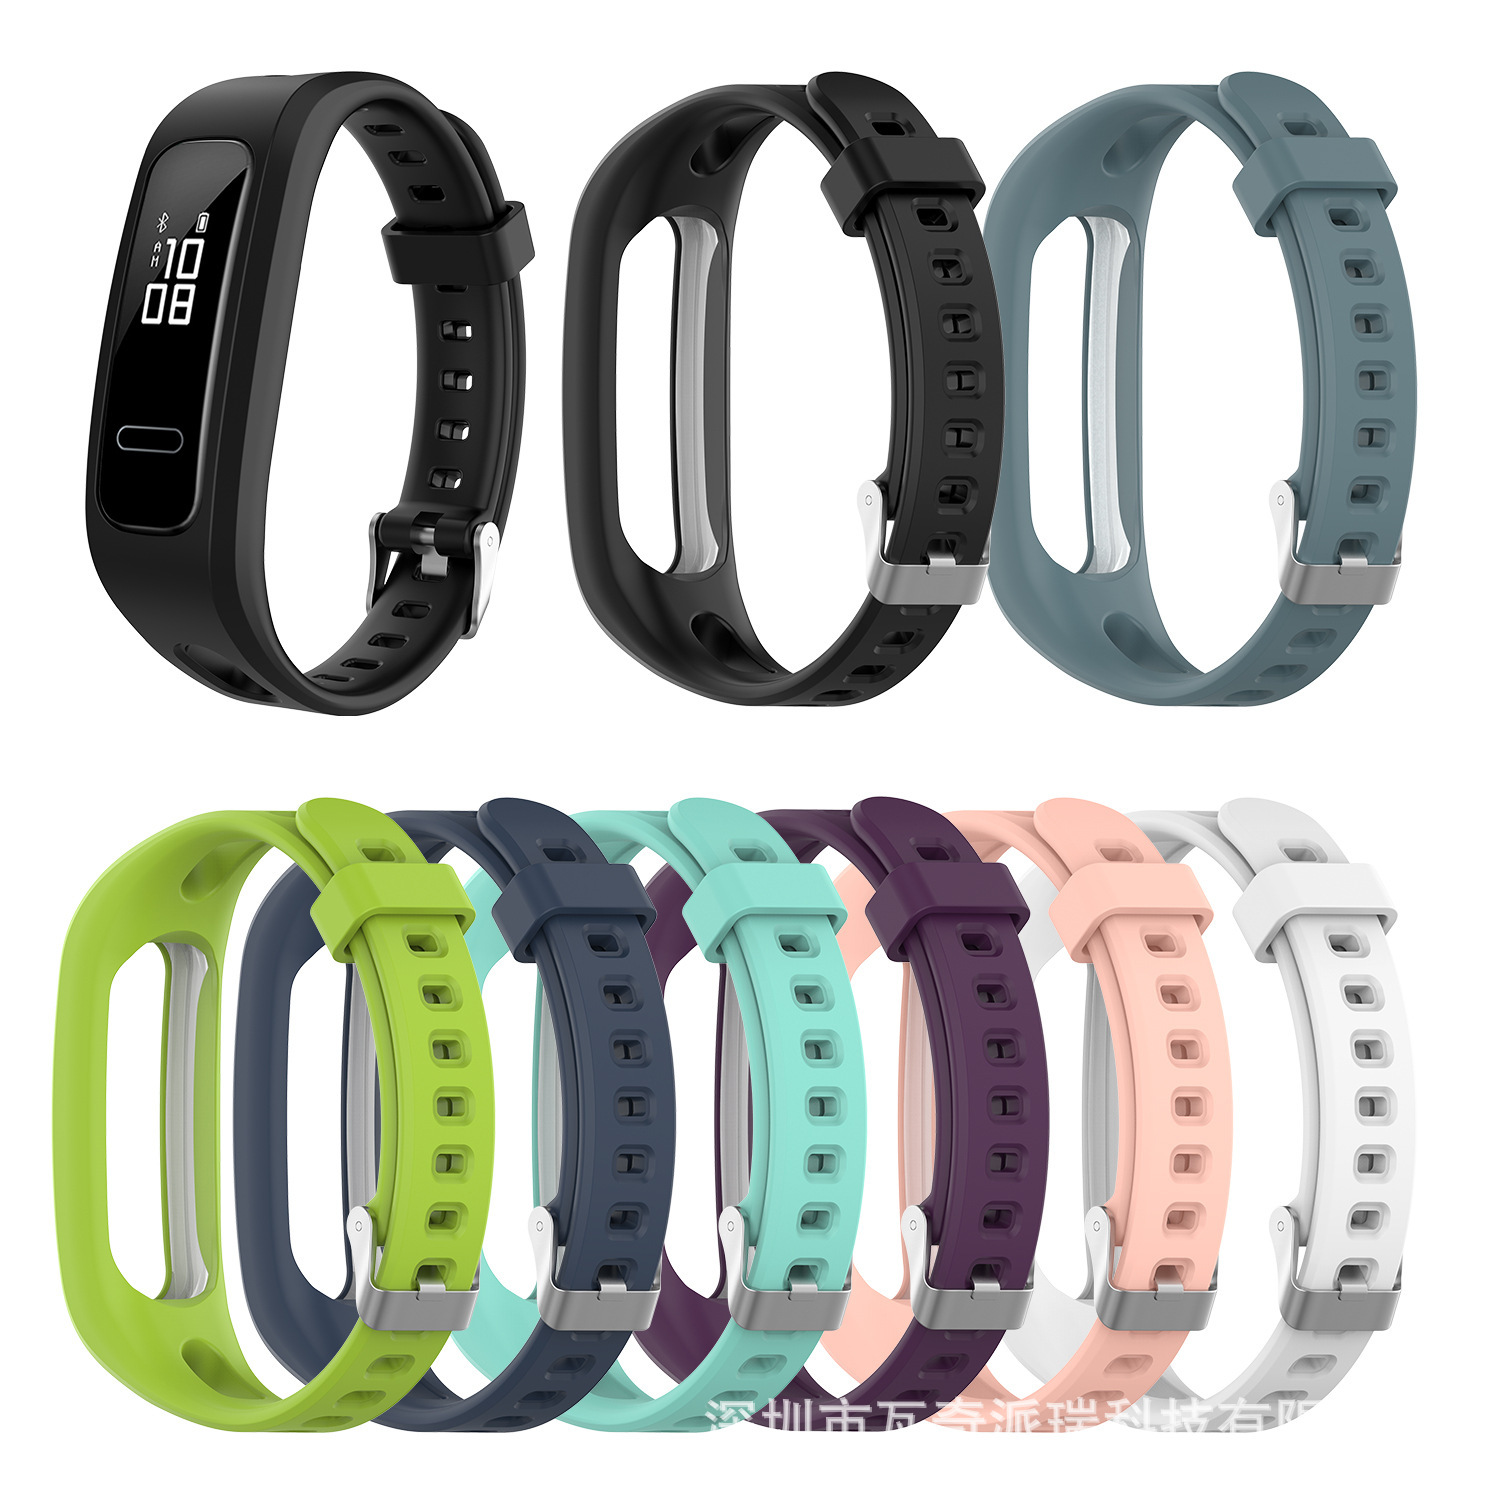 Suitable for Huawei Honor Band 5 Basketb...